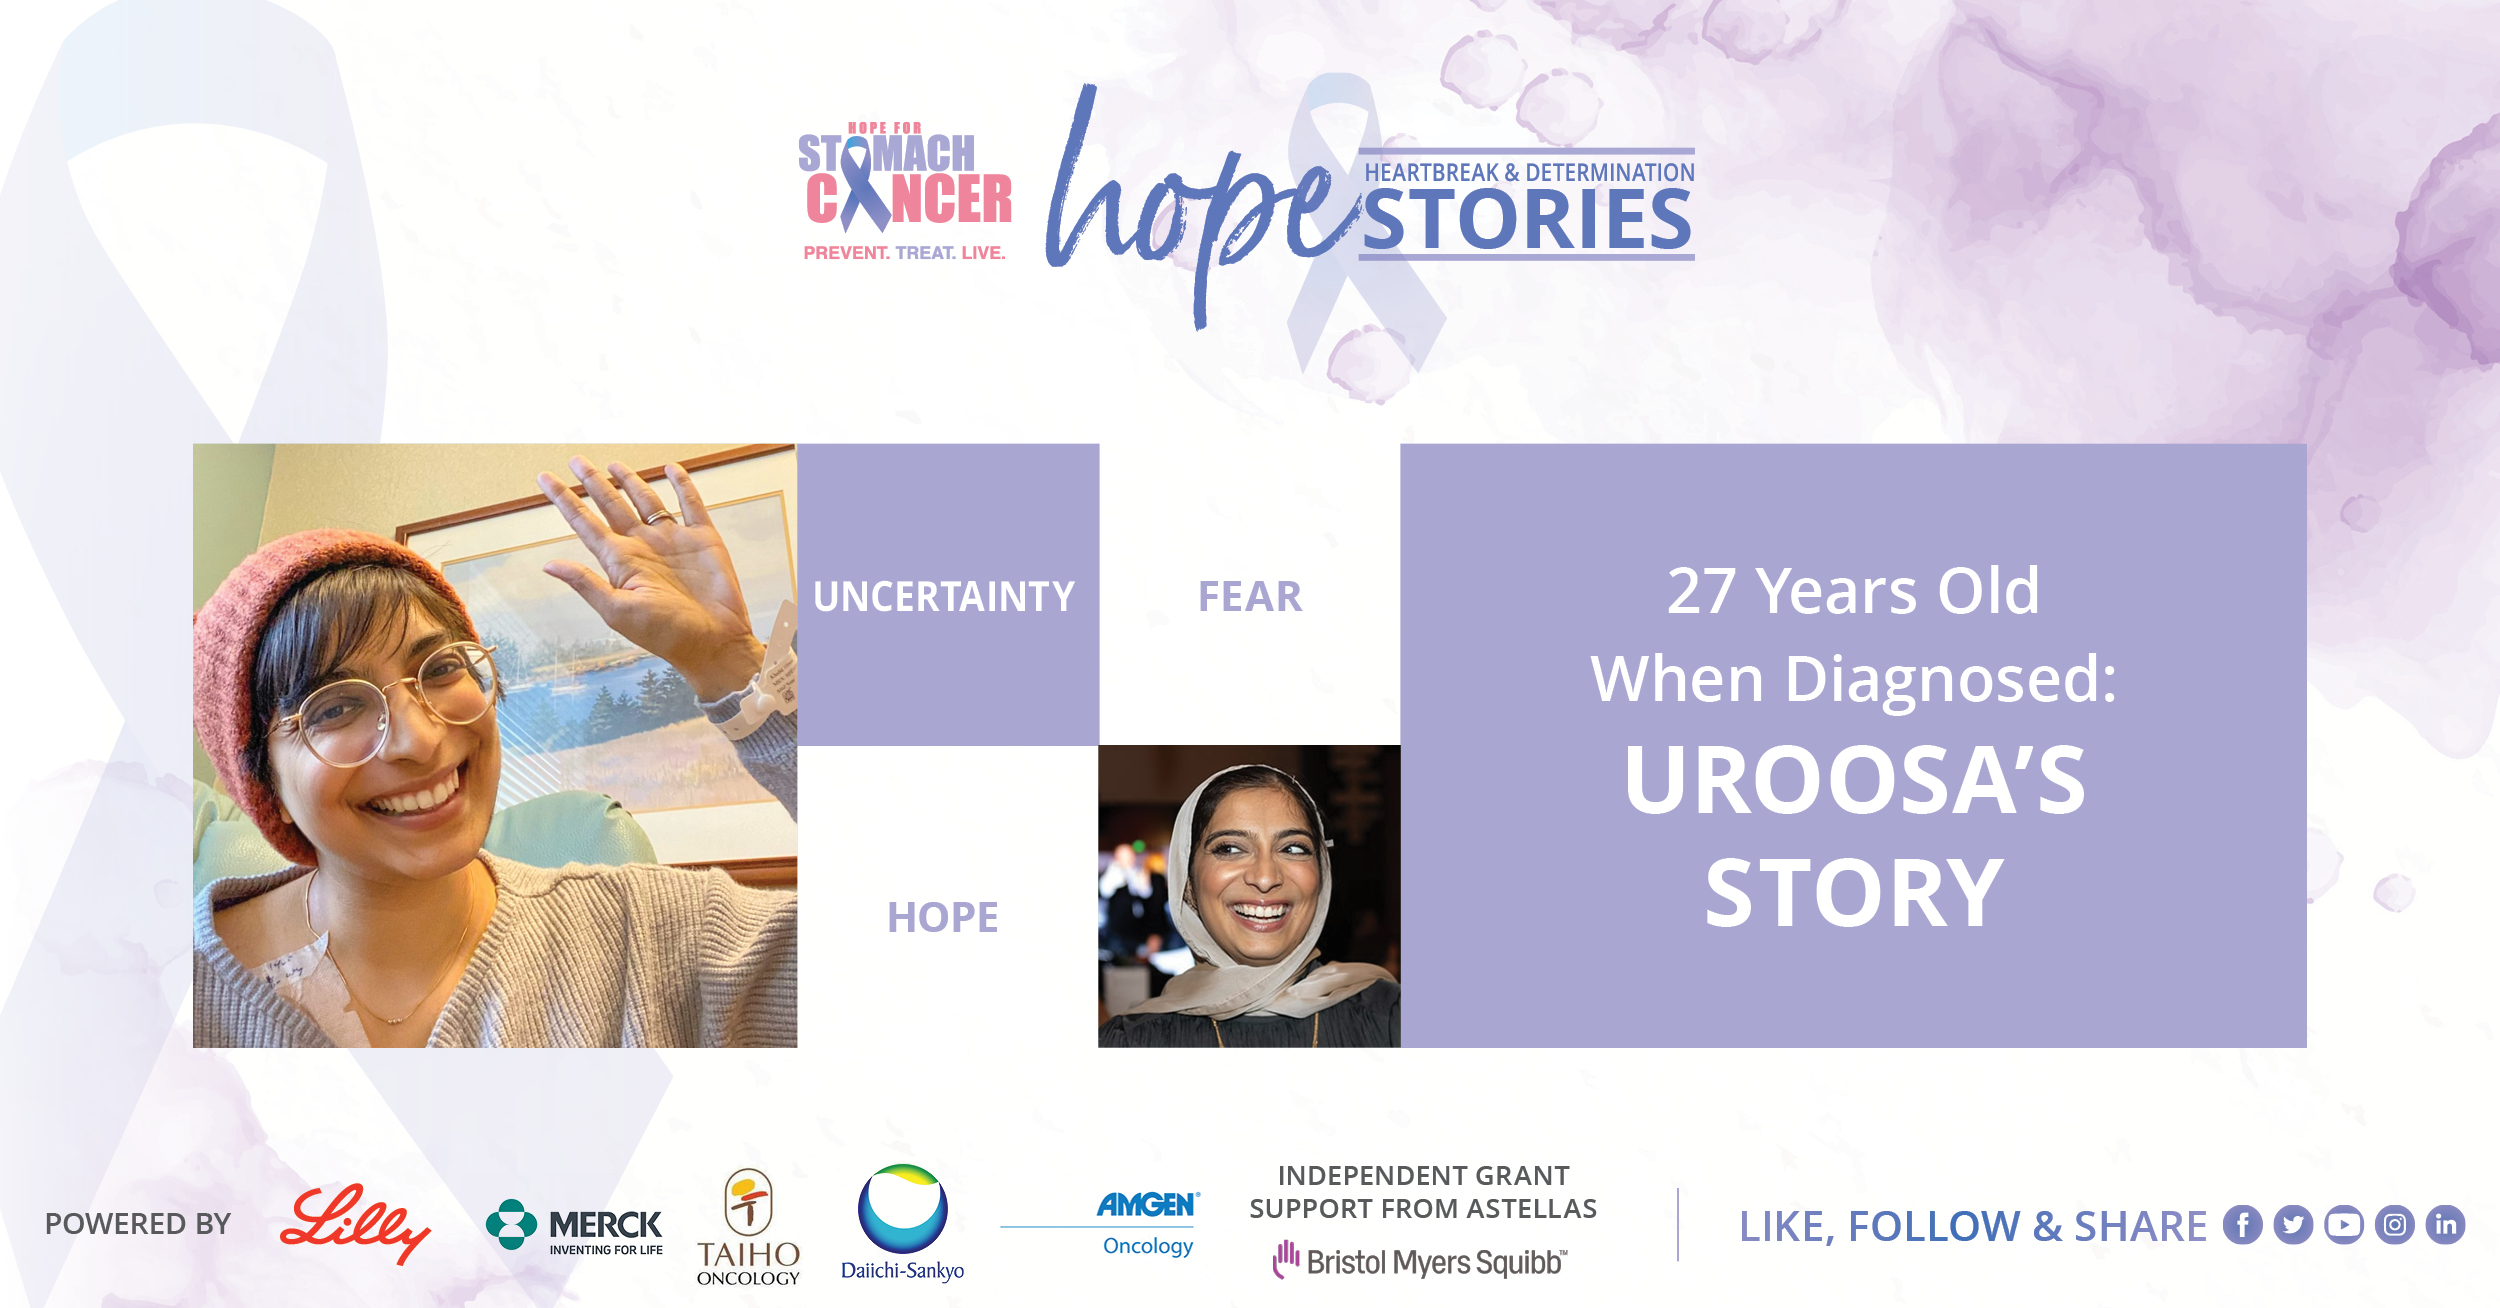 Uroosa's Story: Stage 4 at 27 years old